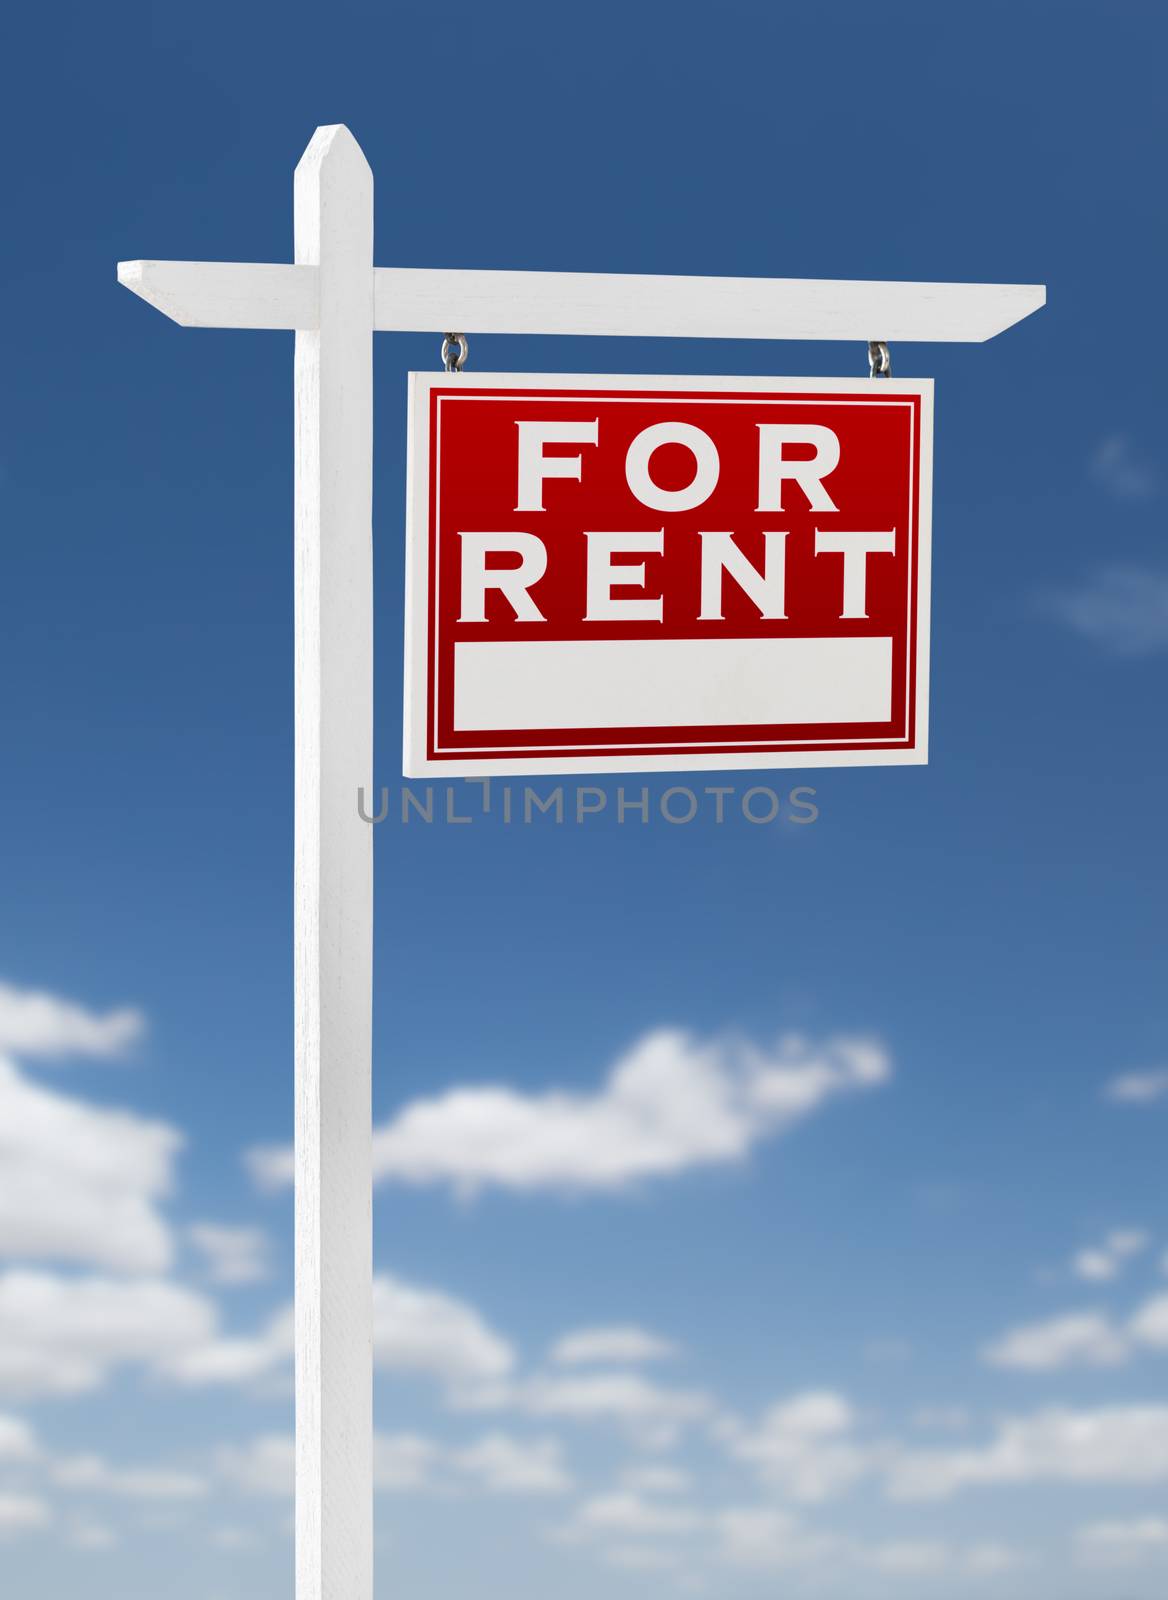 Right Facing For Rent Real Estate Sign on a Blue Sky with Clouds.